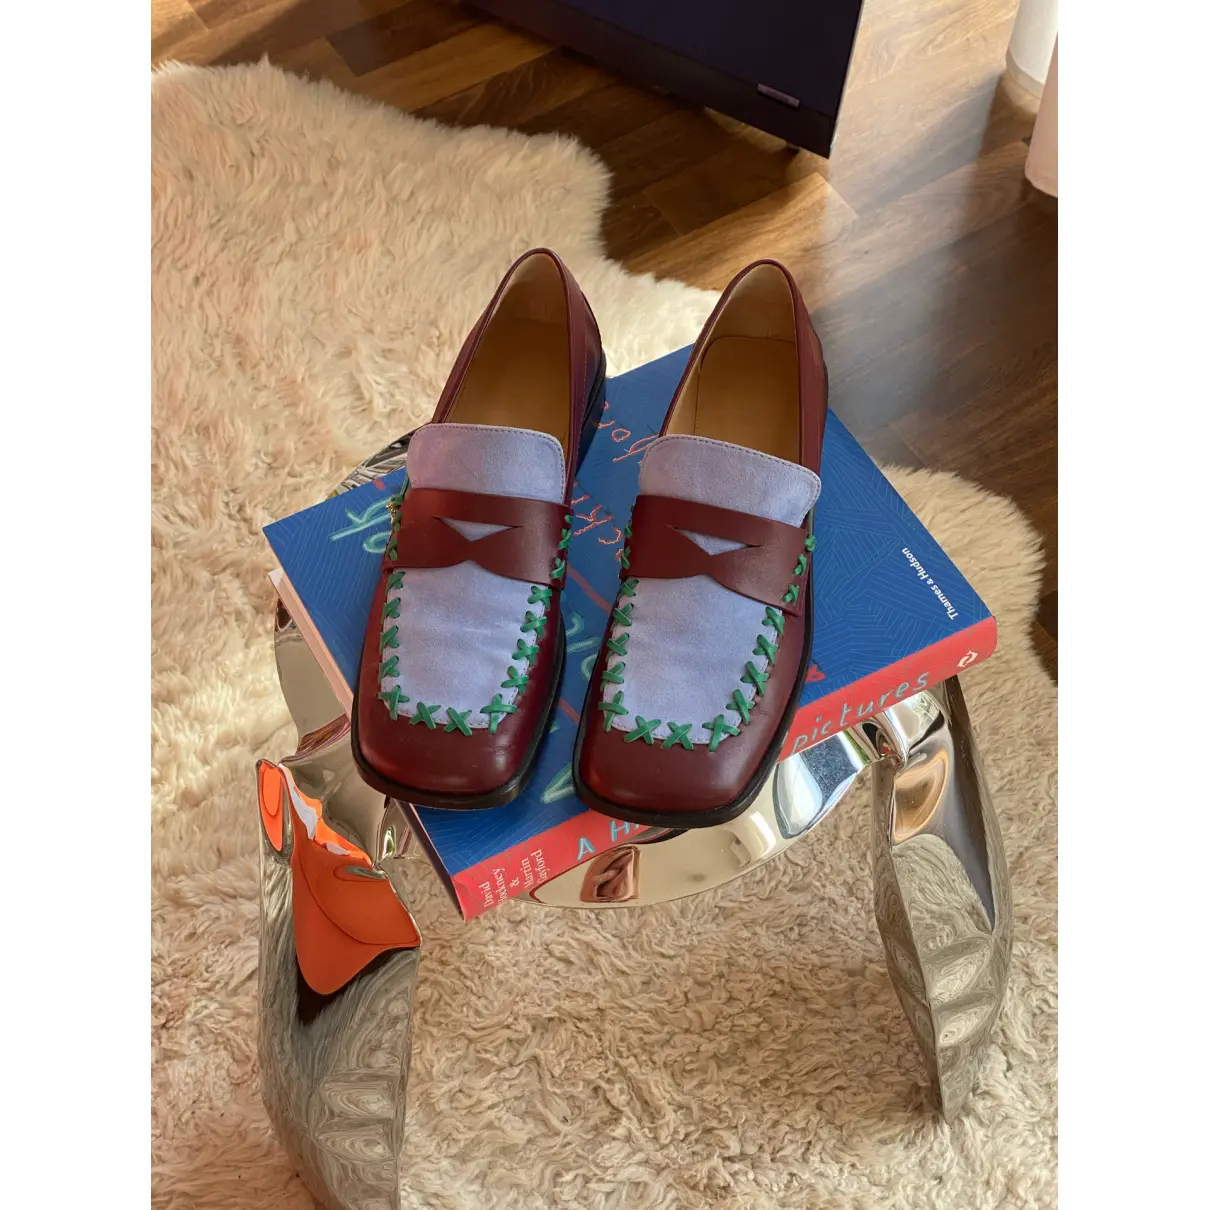 Buy JW Anderson Leather flats online